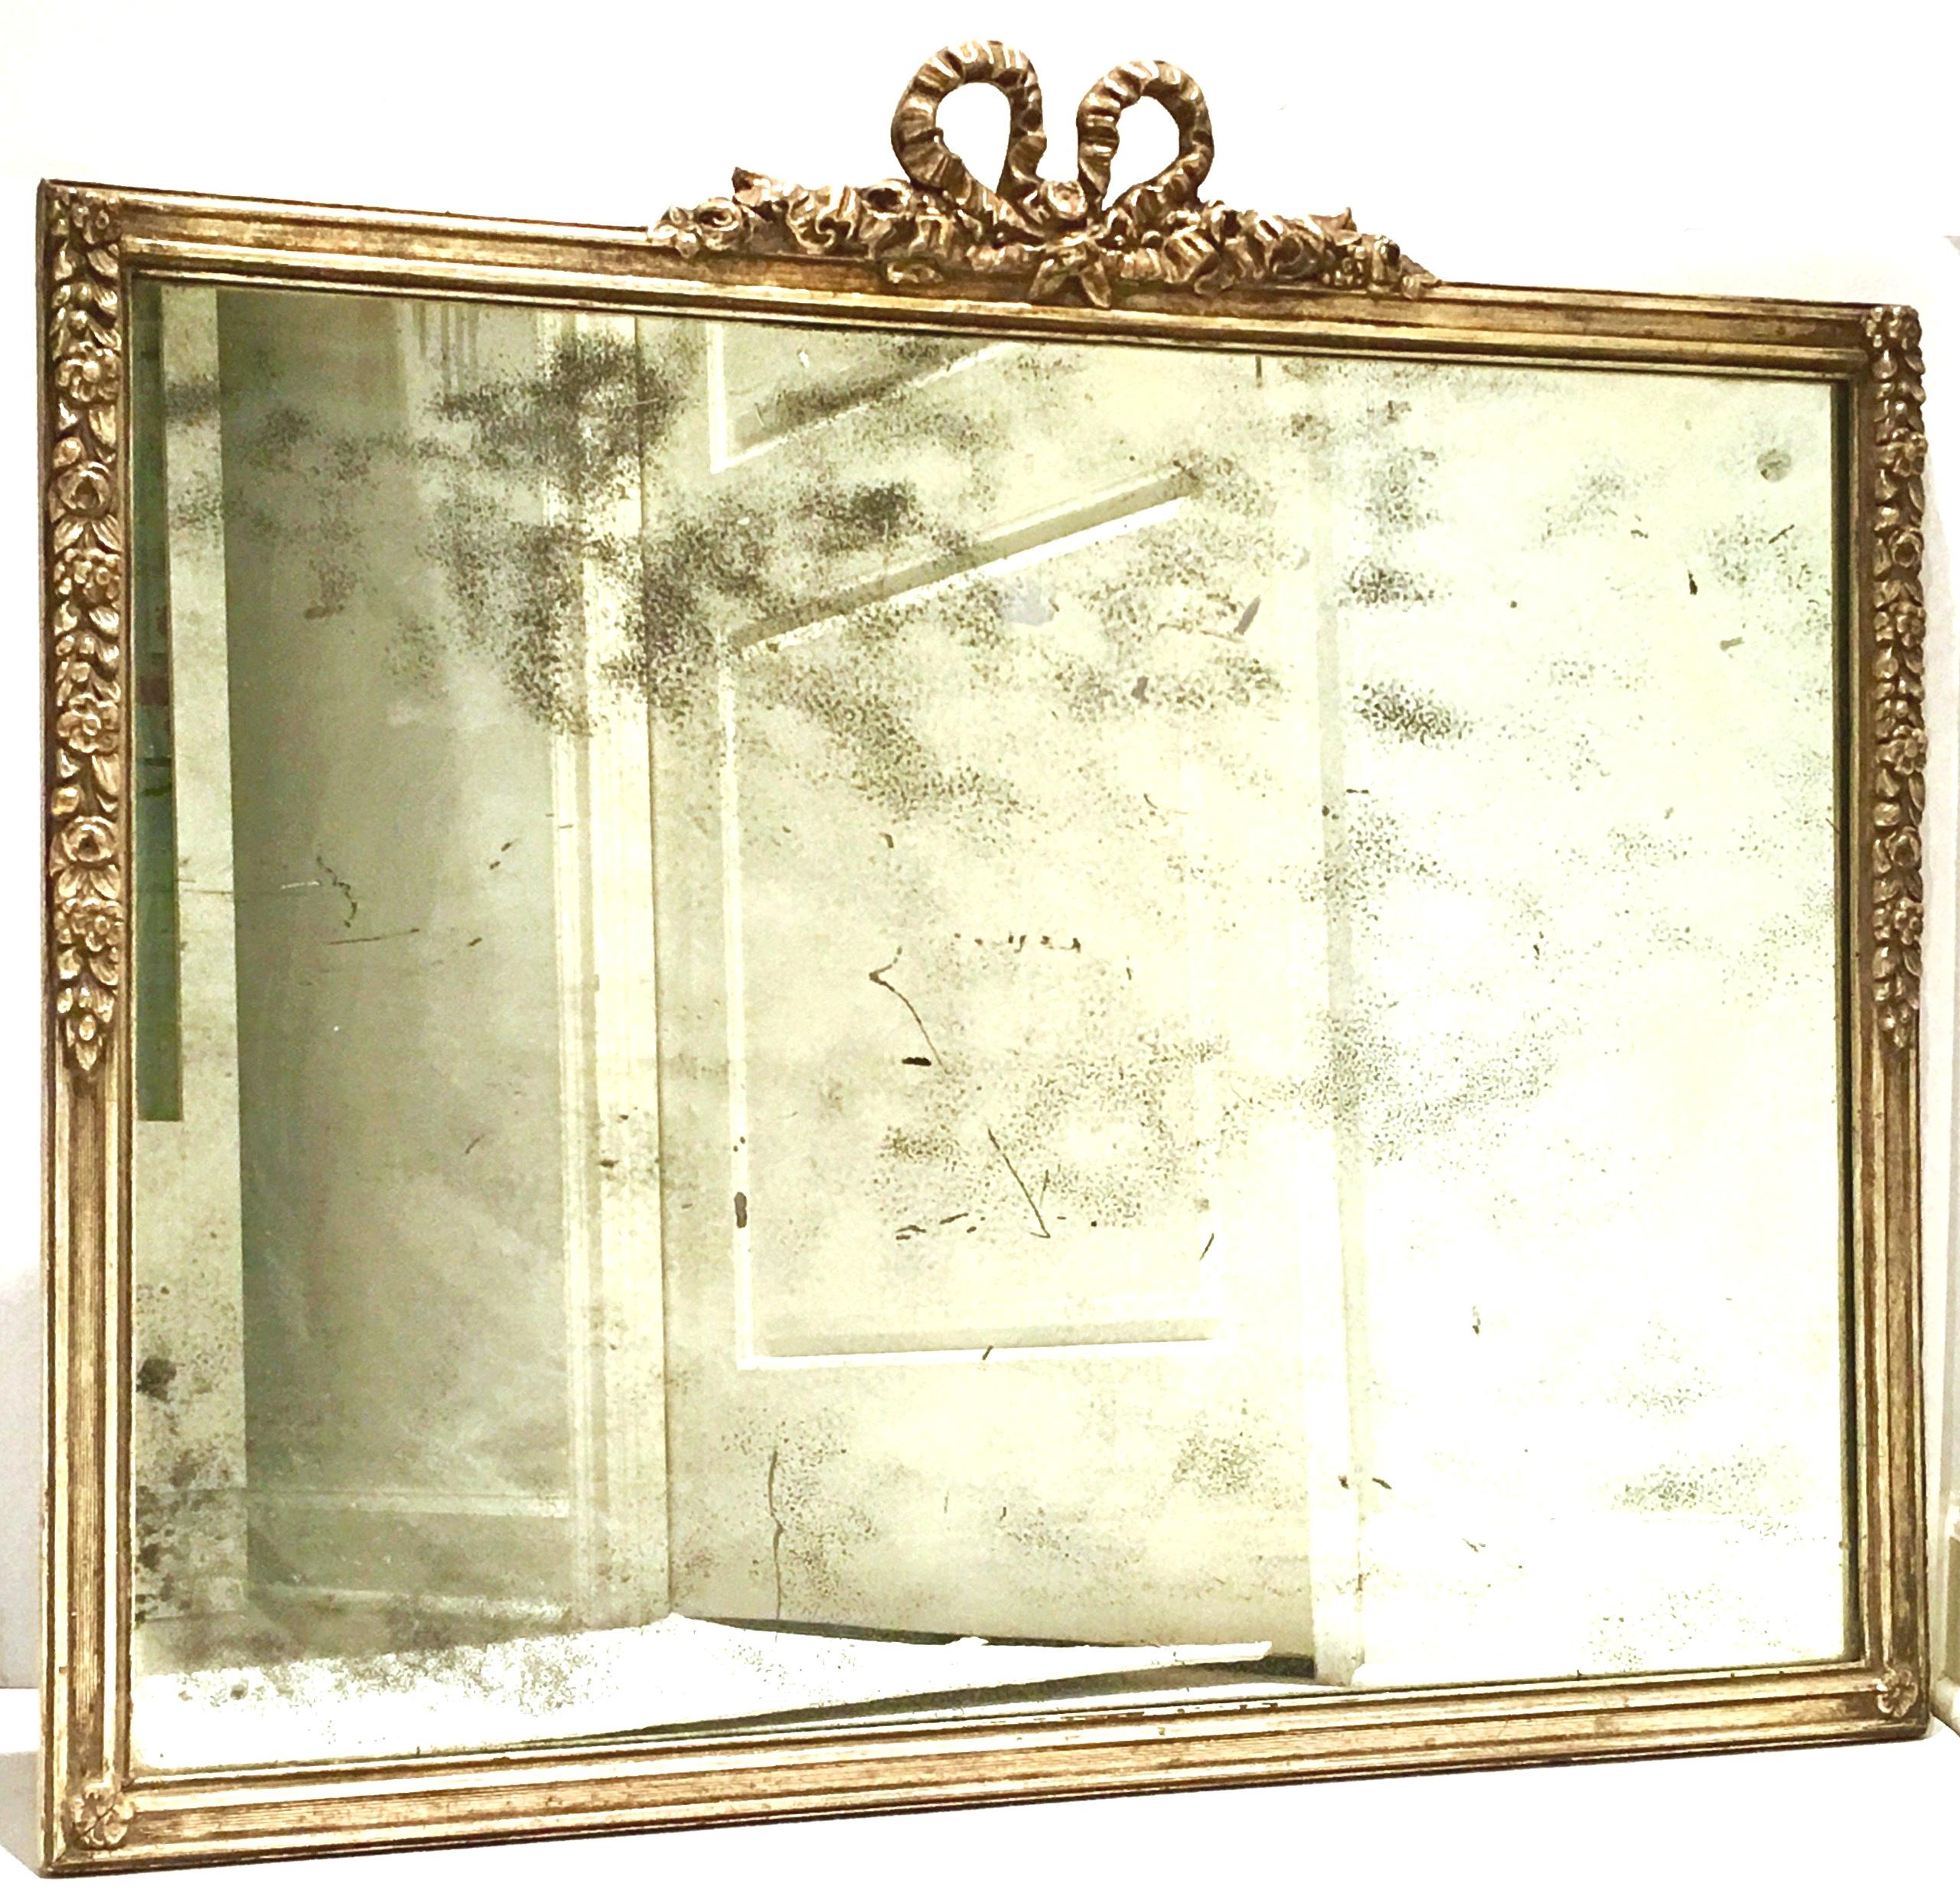 19th century antique Louis XVI style silver leaf hand carved wood mirror. Original heavy mirror with coveted and authentic antique wear and patina. Hand carved high relief wood with authentic silver leaf finish, floral motif with a central crown